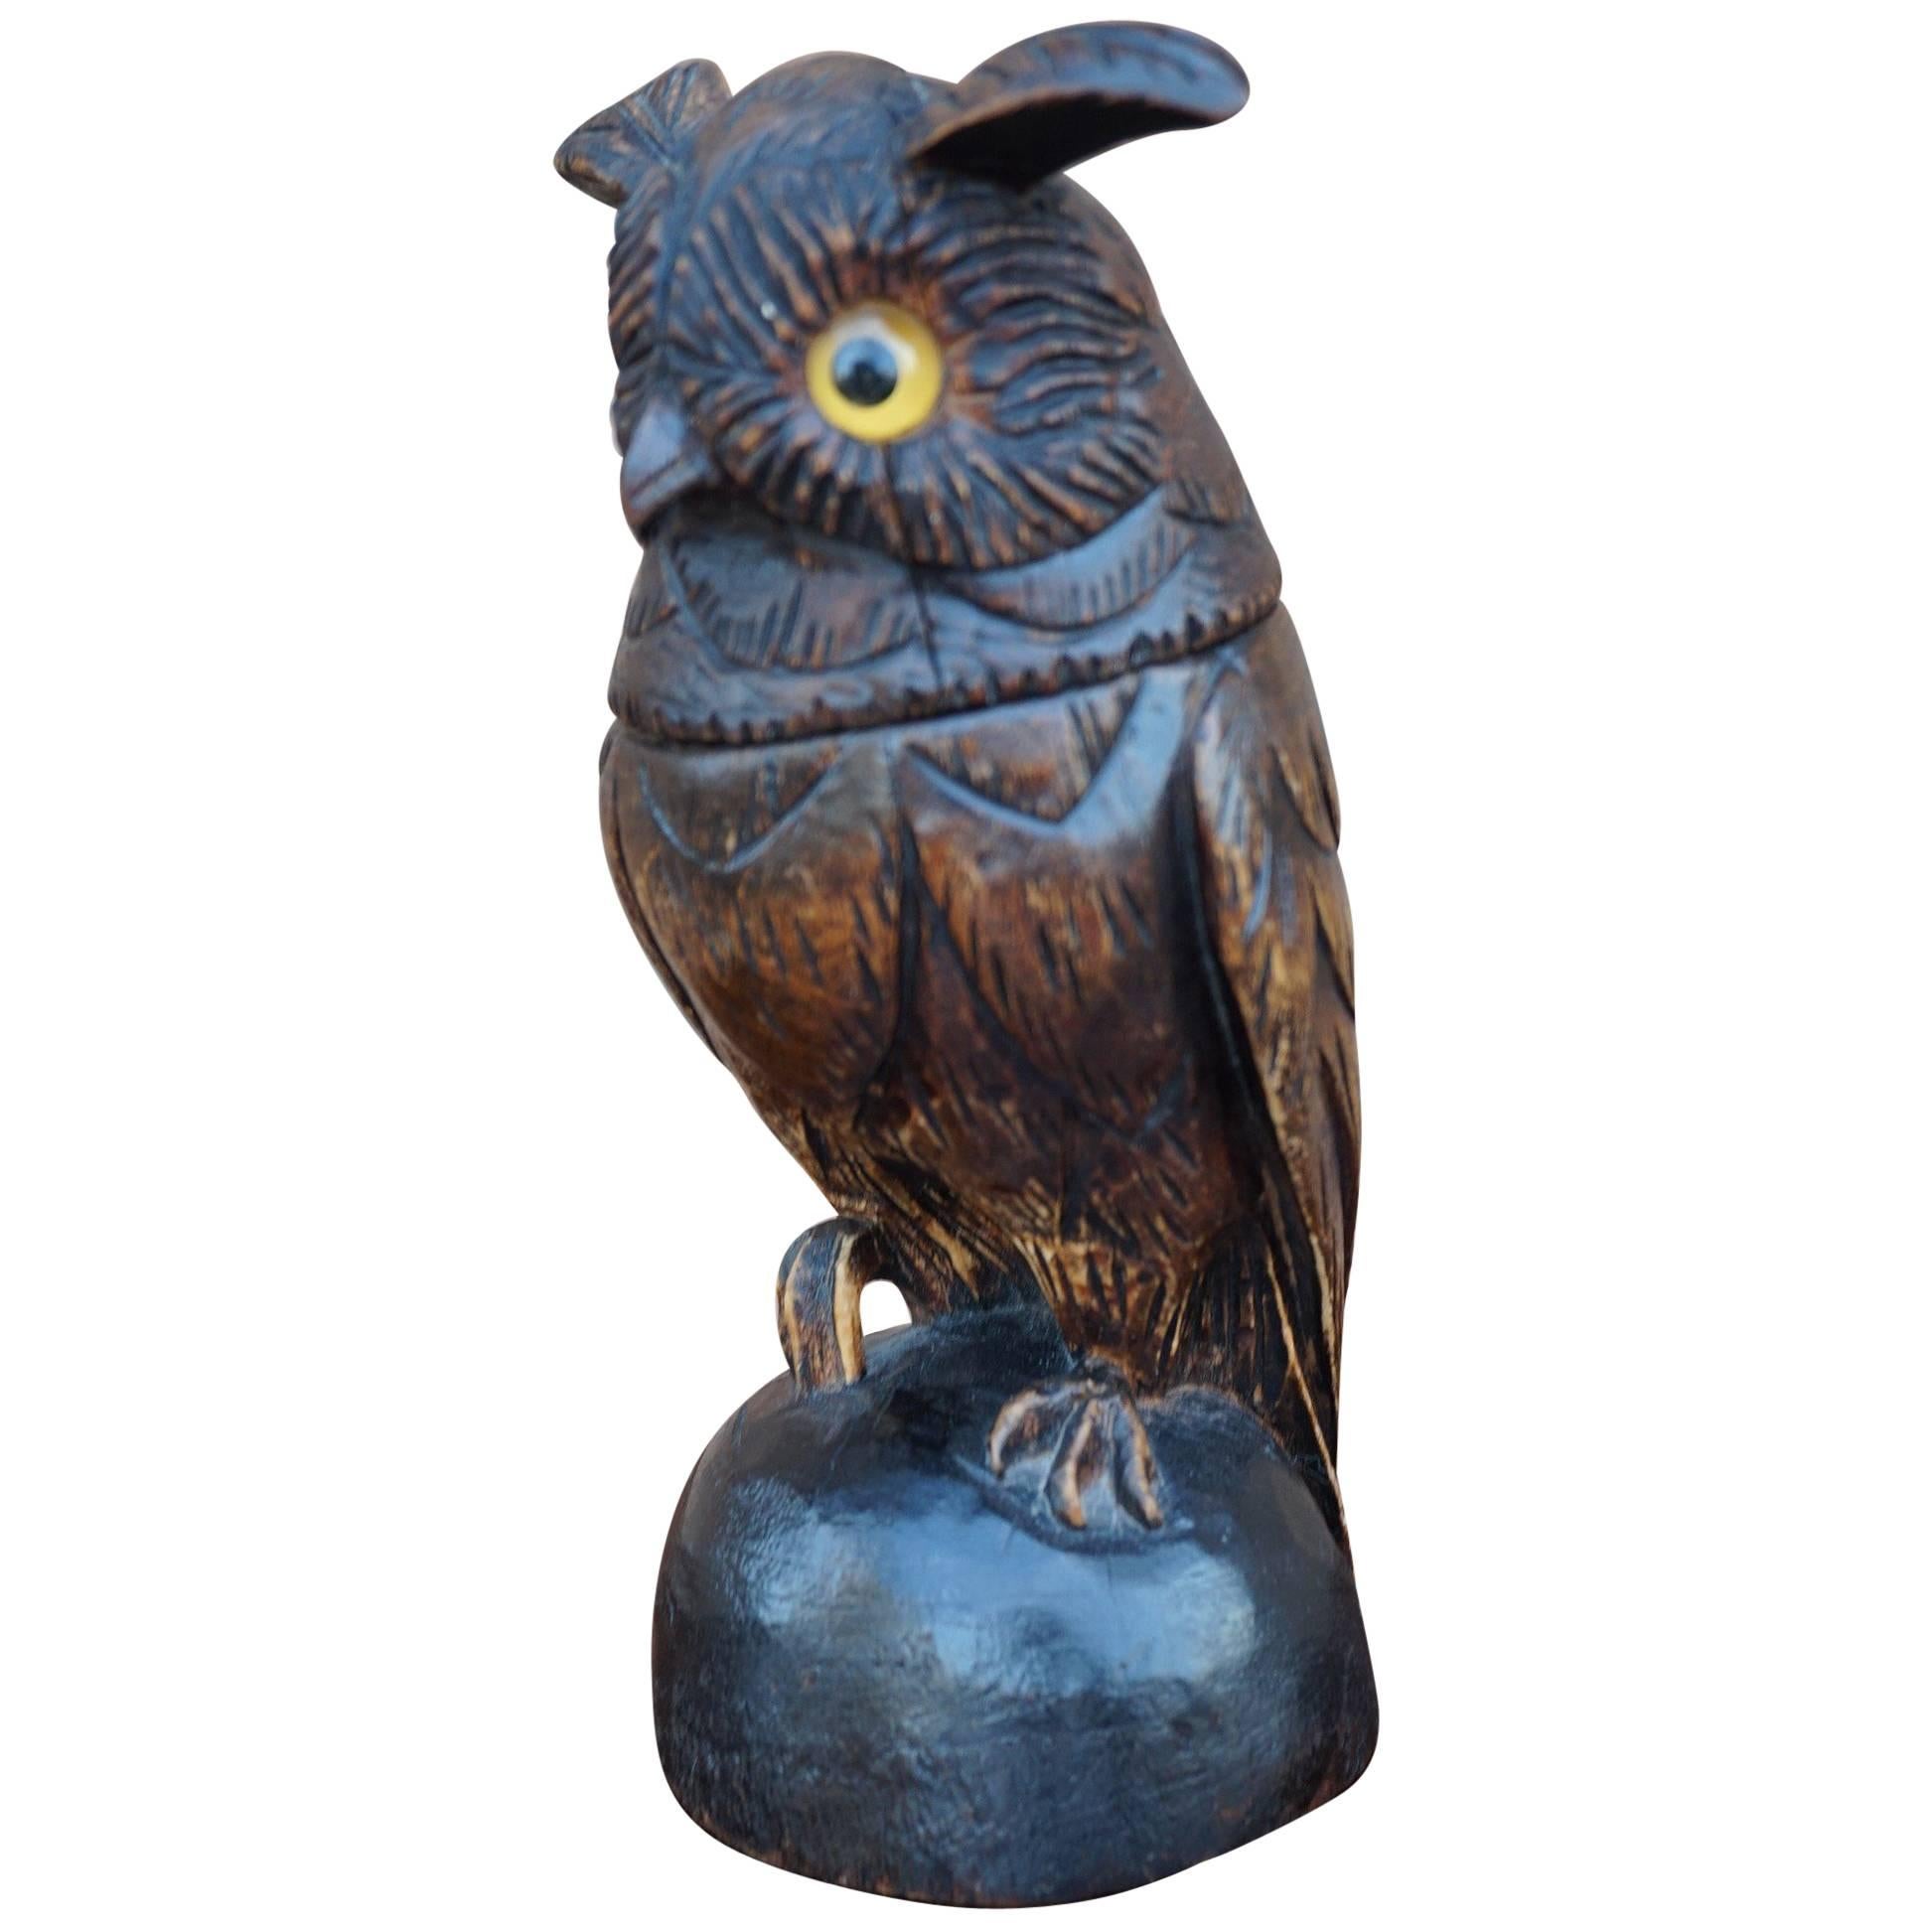 Antique Hand-Carved Black Forest Owl Sculpture with Glass Eyes and Brass Inkwell